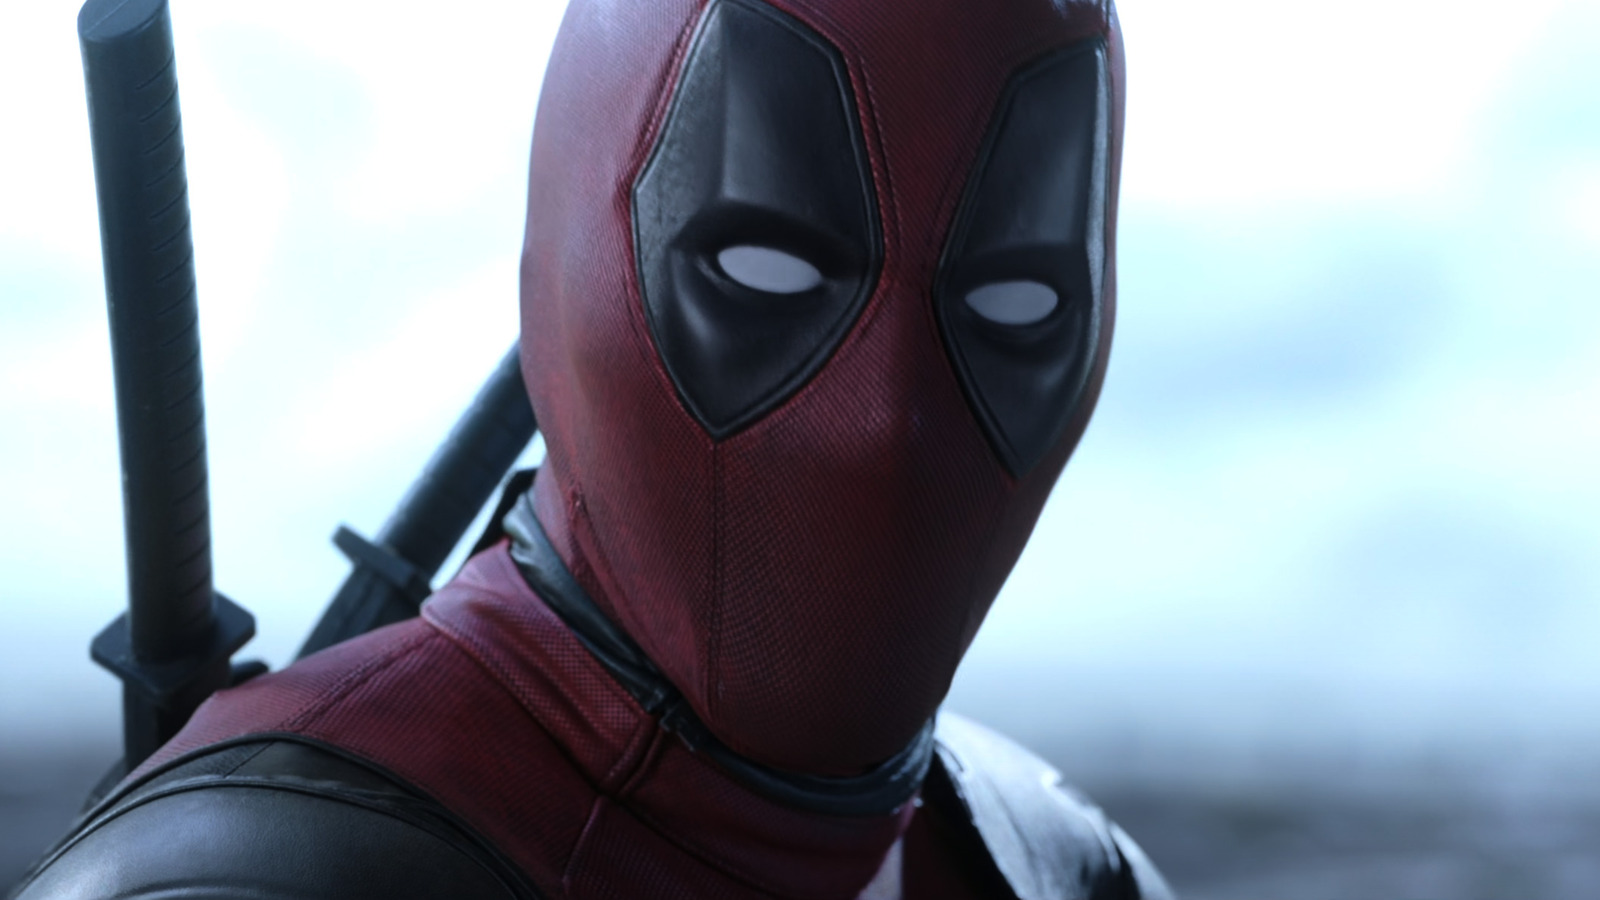 DEADPOOL 3 Won't Meet May 2024 Release Date With Ongoing Actors Strike –